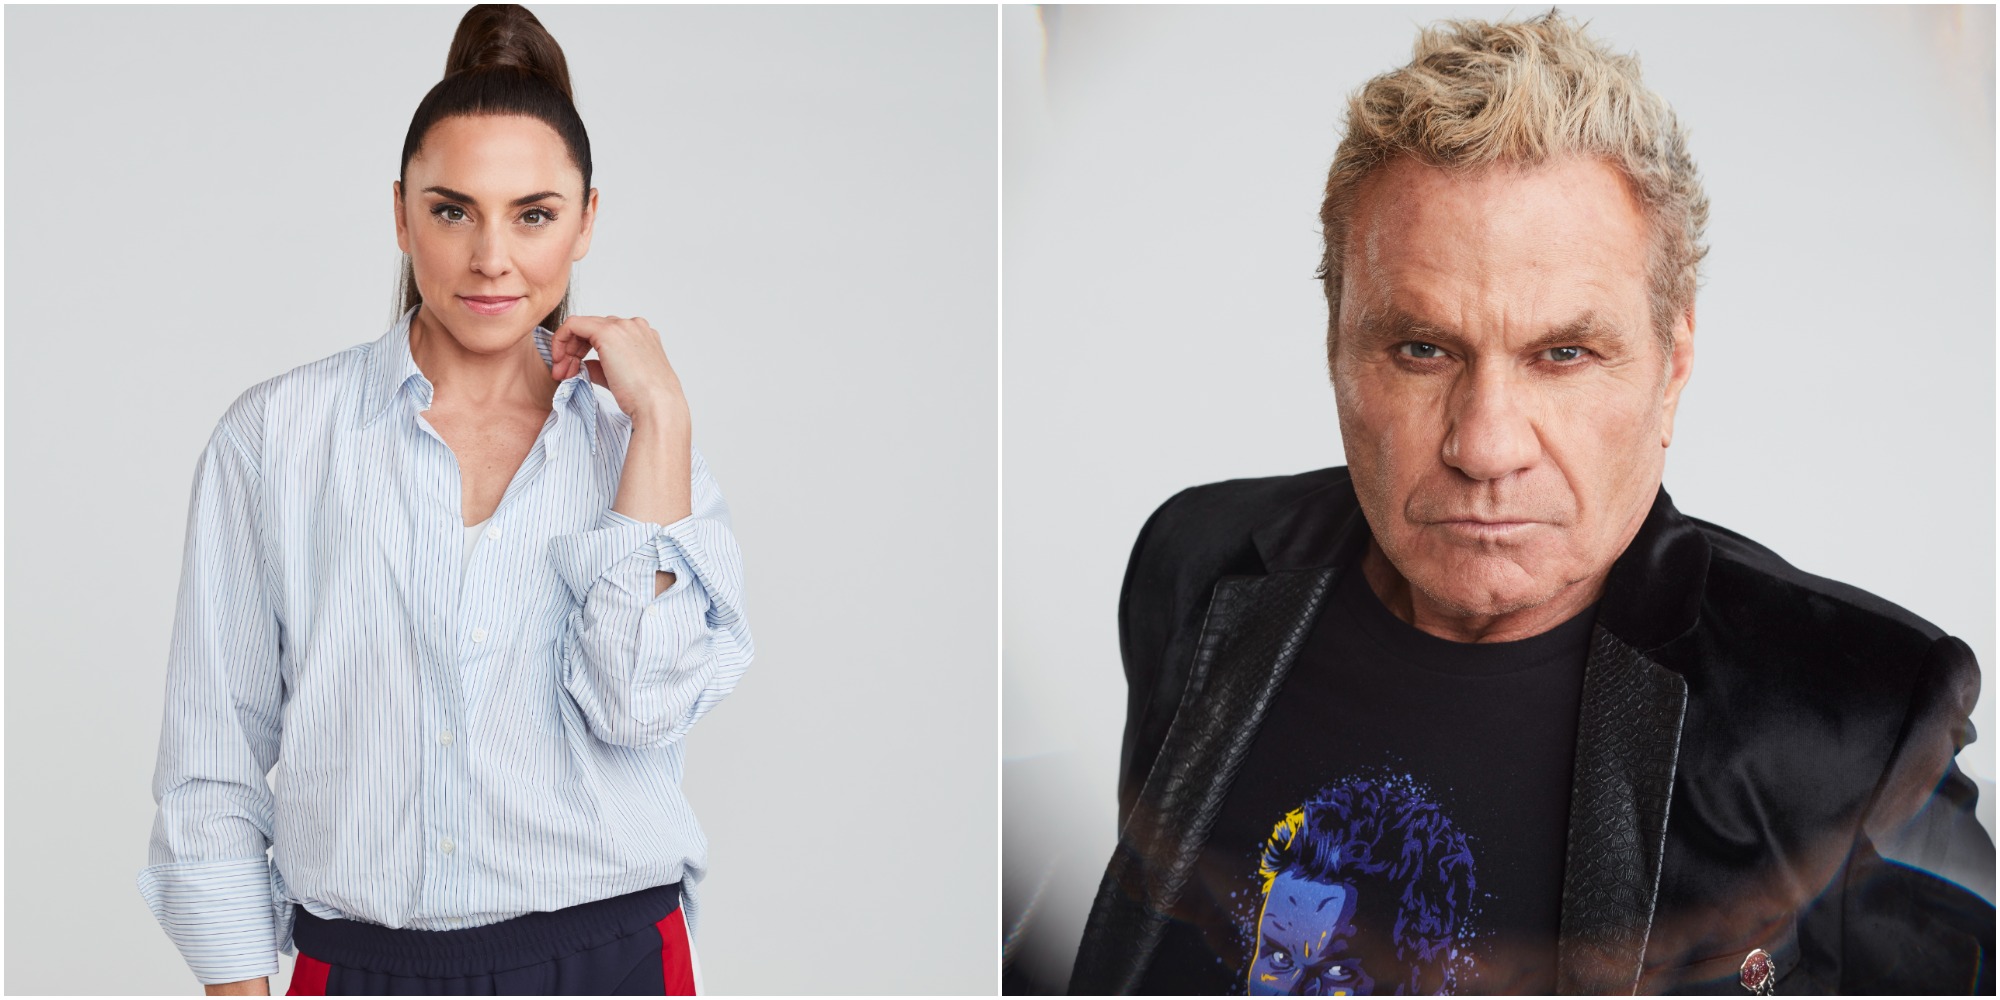 'Dancing With the Stars' cast members Melanie C., Martin Kove posing for the camera